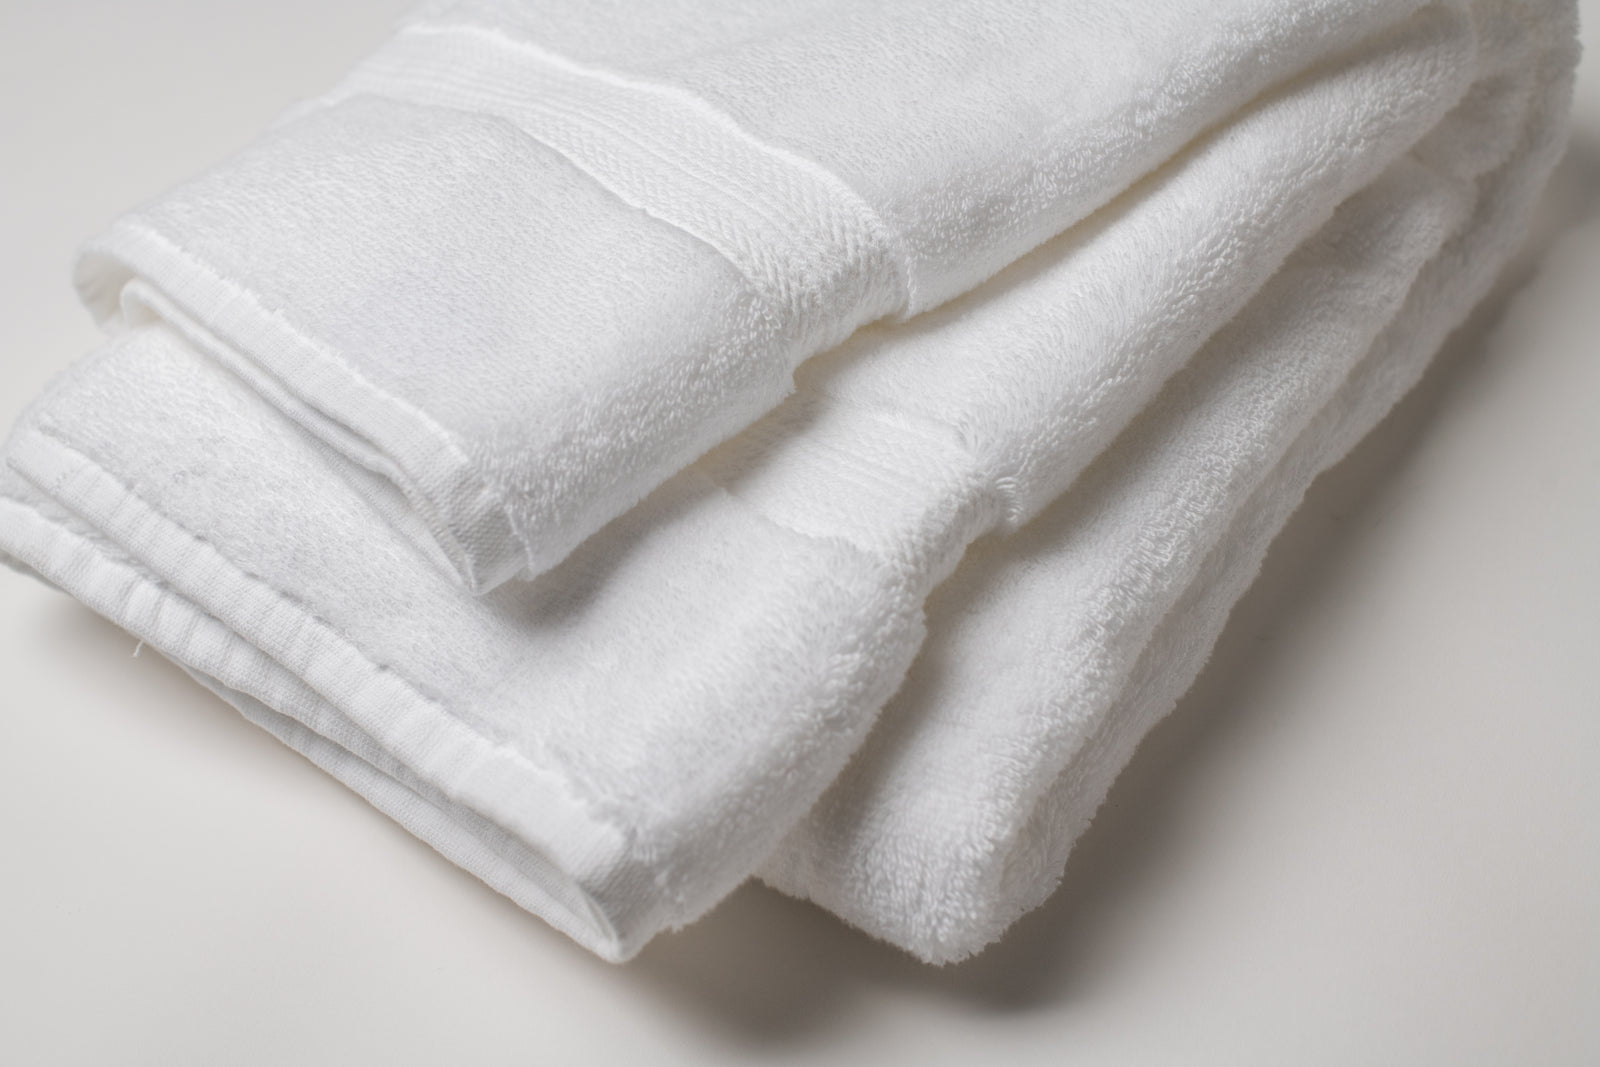 How To Choose The Perfect Bath Towel - American Blossom Linens